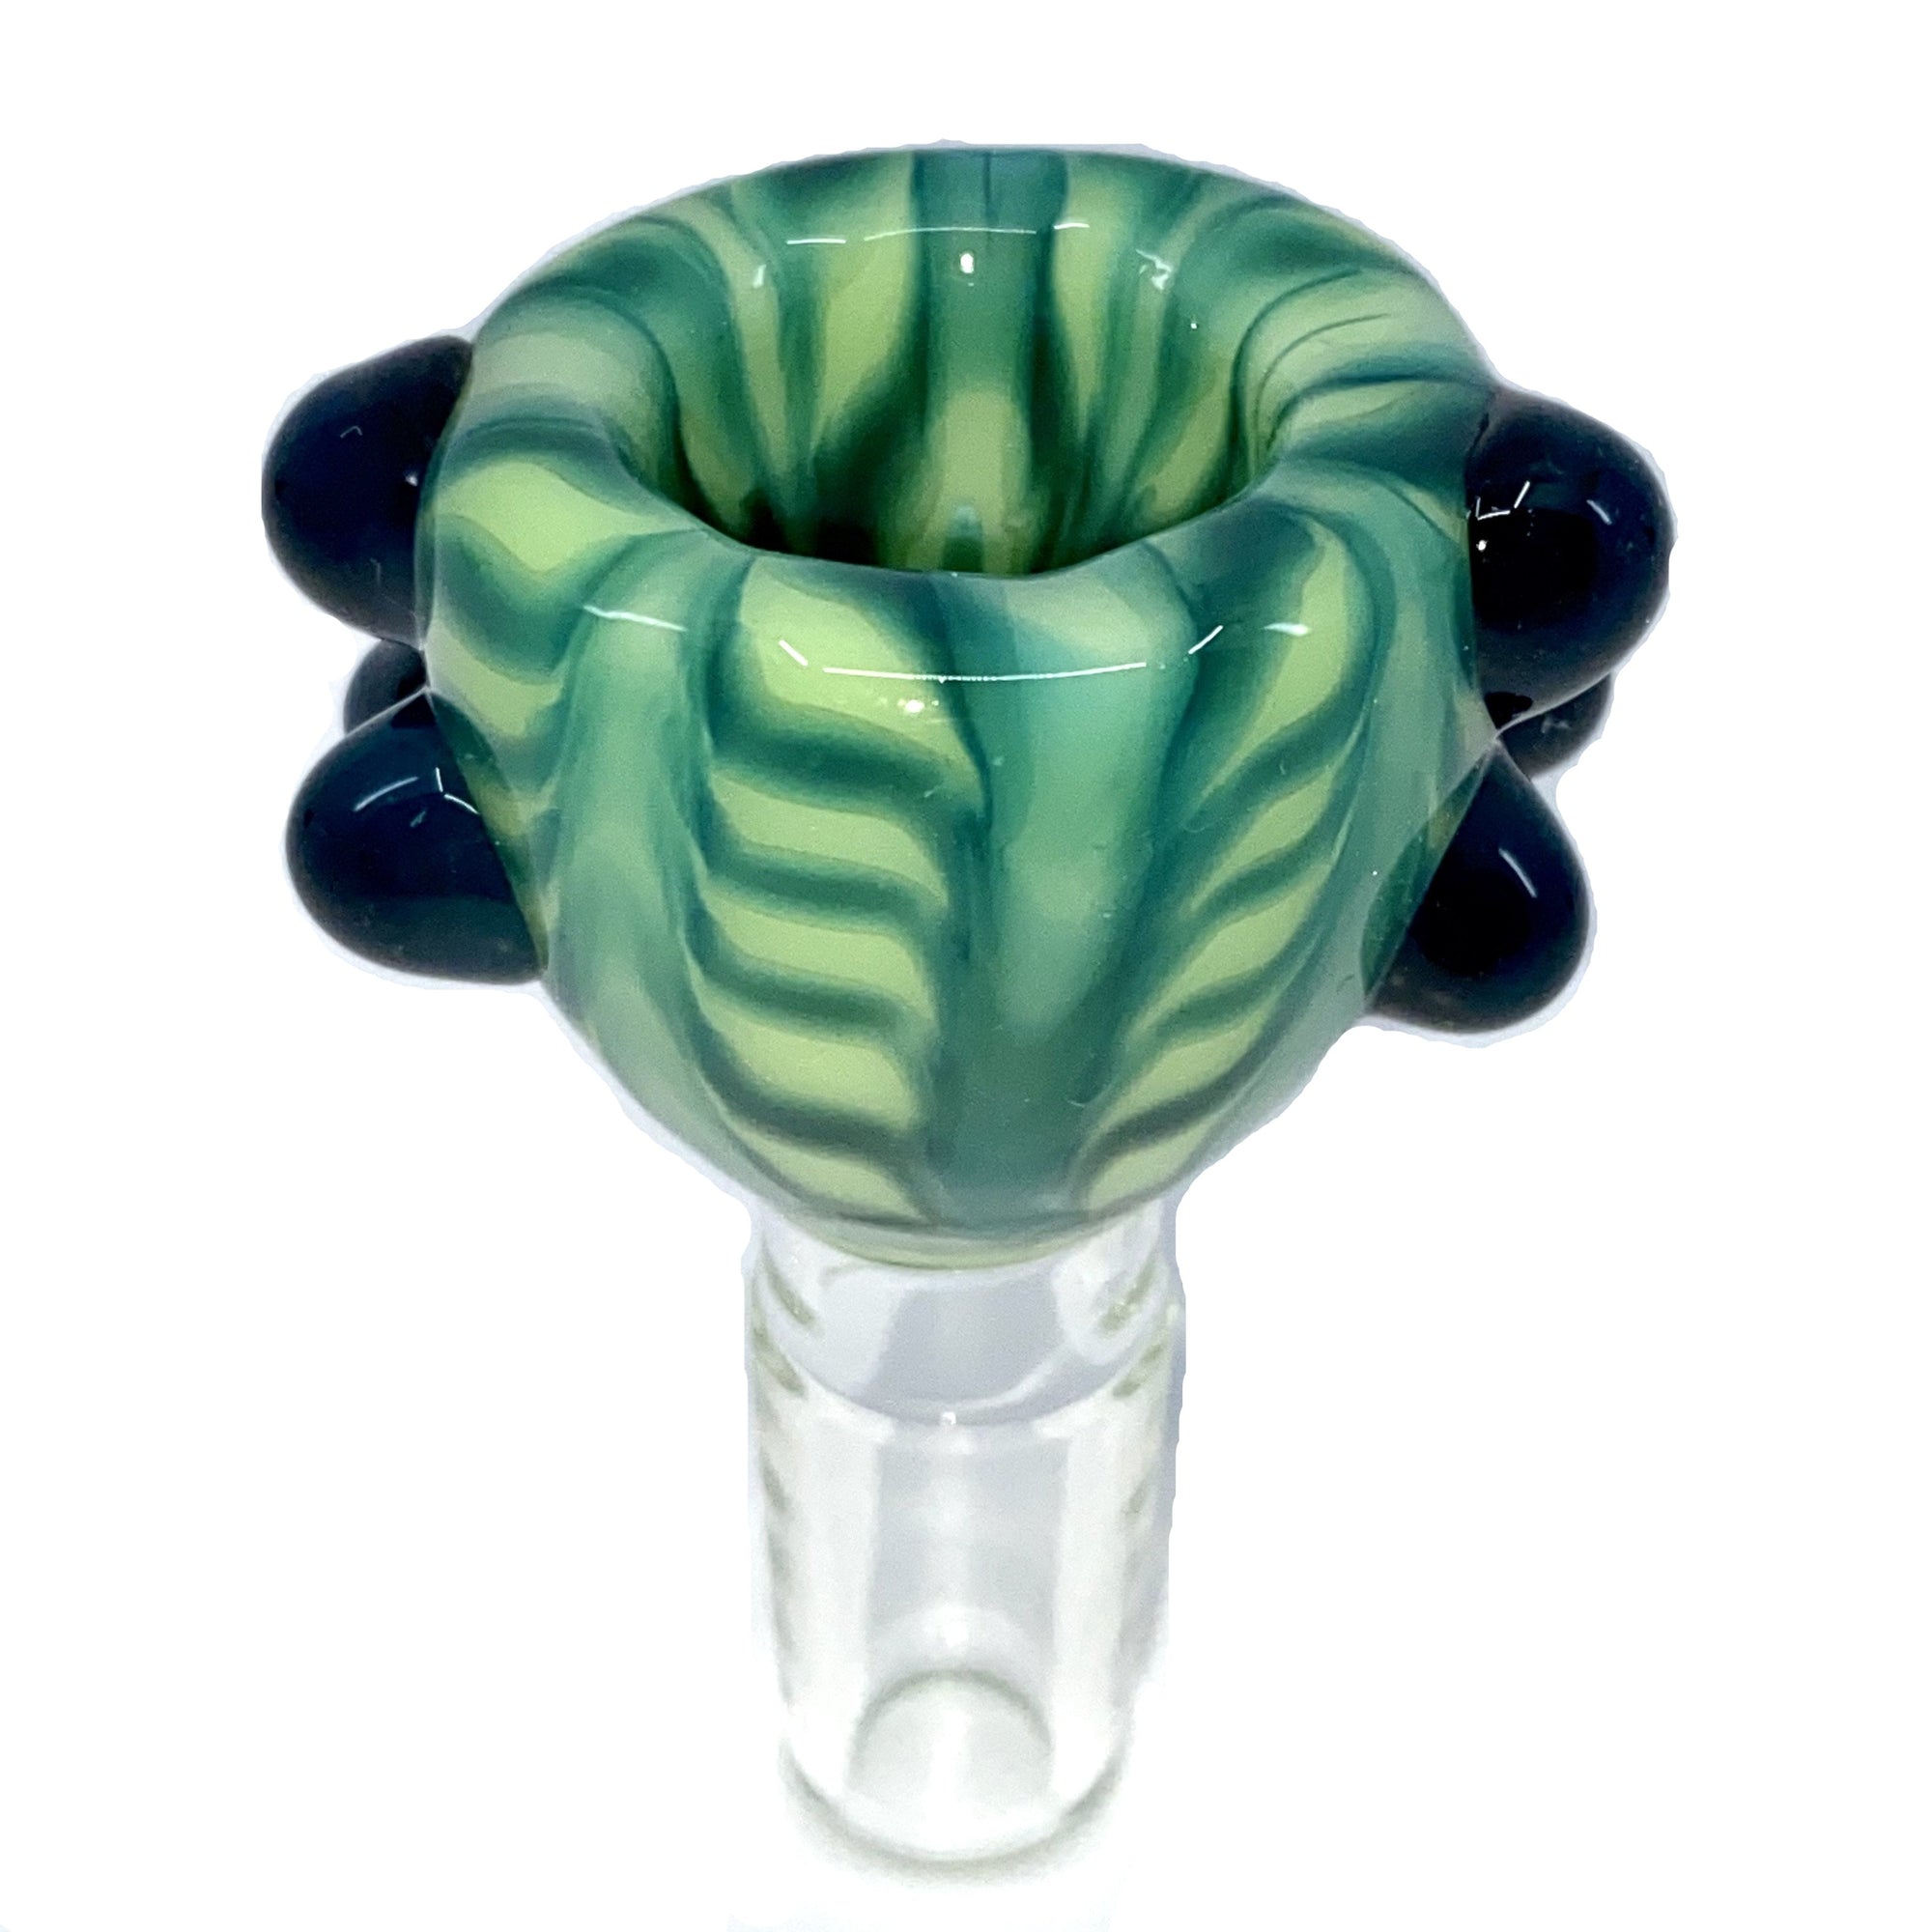 Colored Wrap and Rake Push Bowl Slide 14mm (Green/Blue) show variants